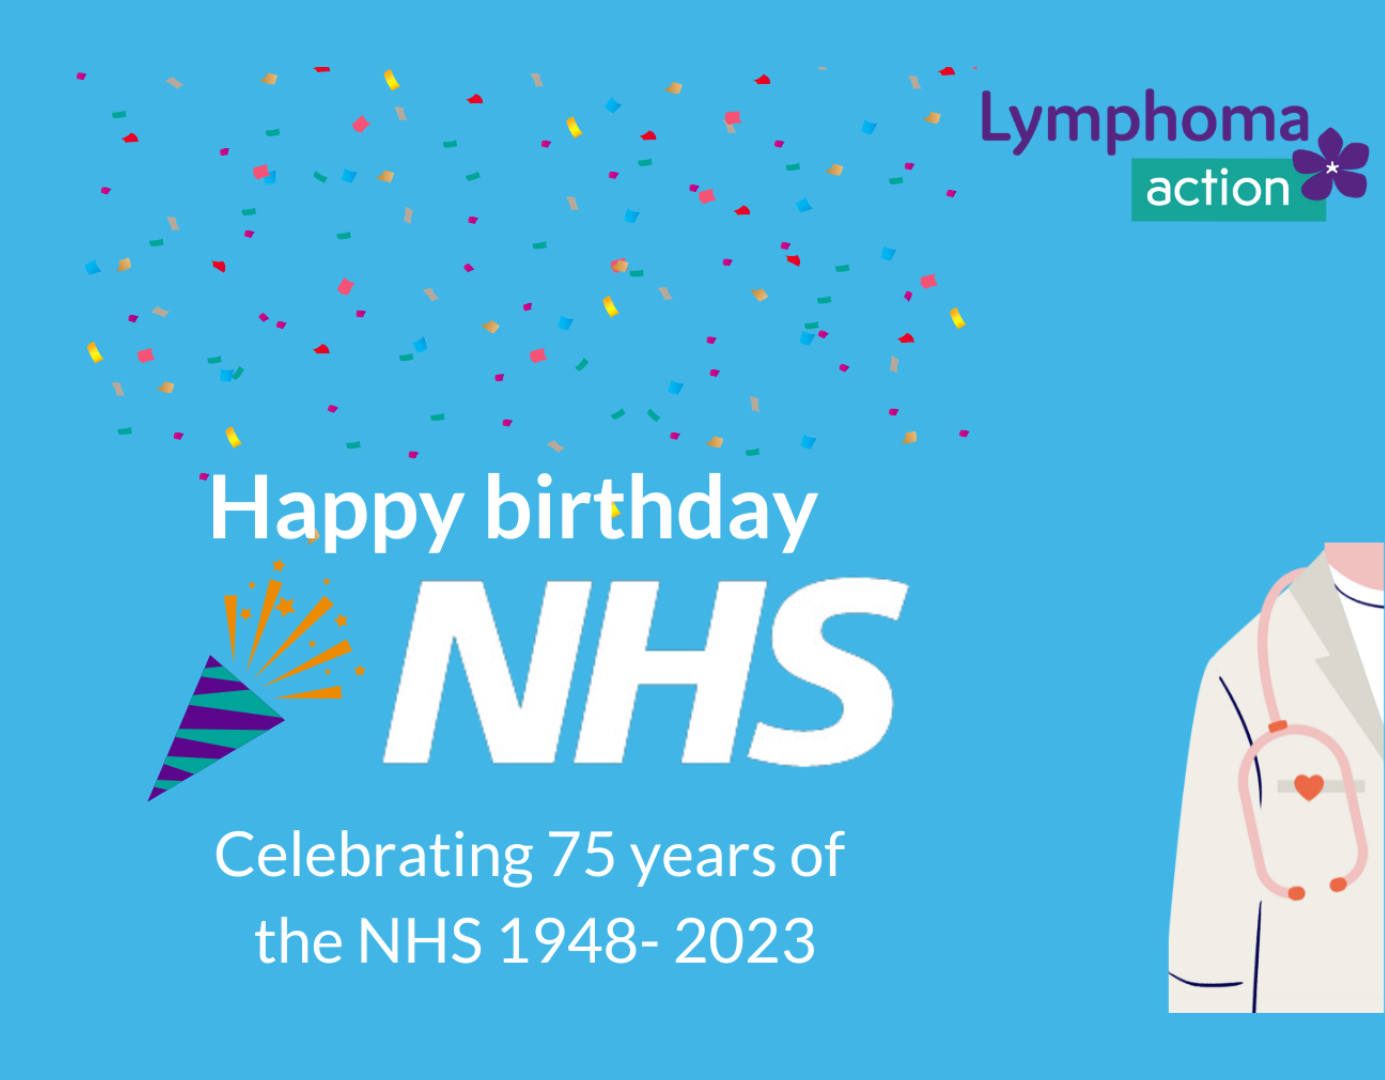 Blue background with NHS and celebration imagery. Happy birthday NHS. Celebrating 75 years of the NHS 1948-2023